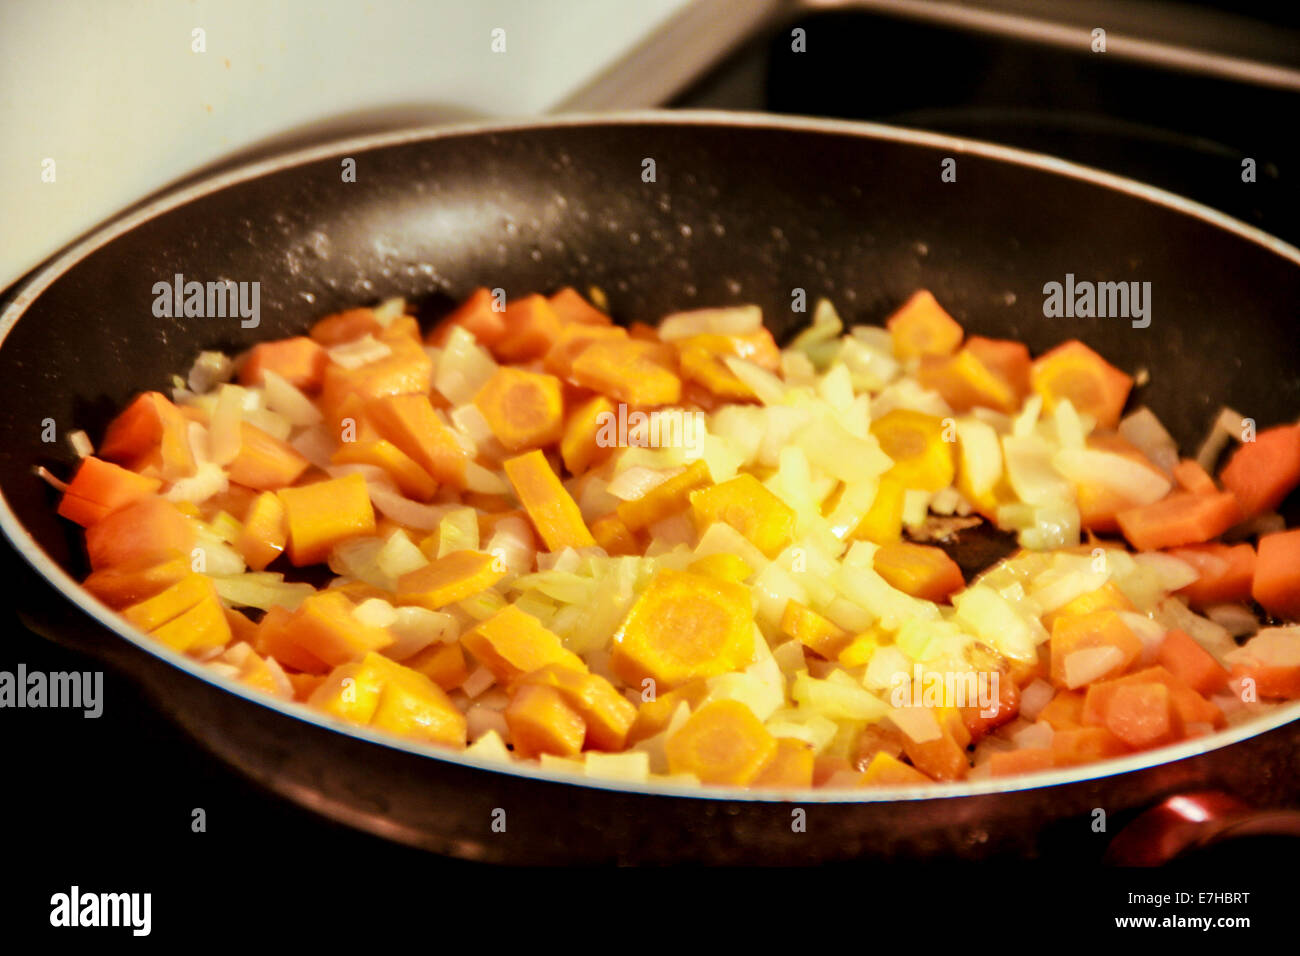 Cooking vegetables Stock Photo